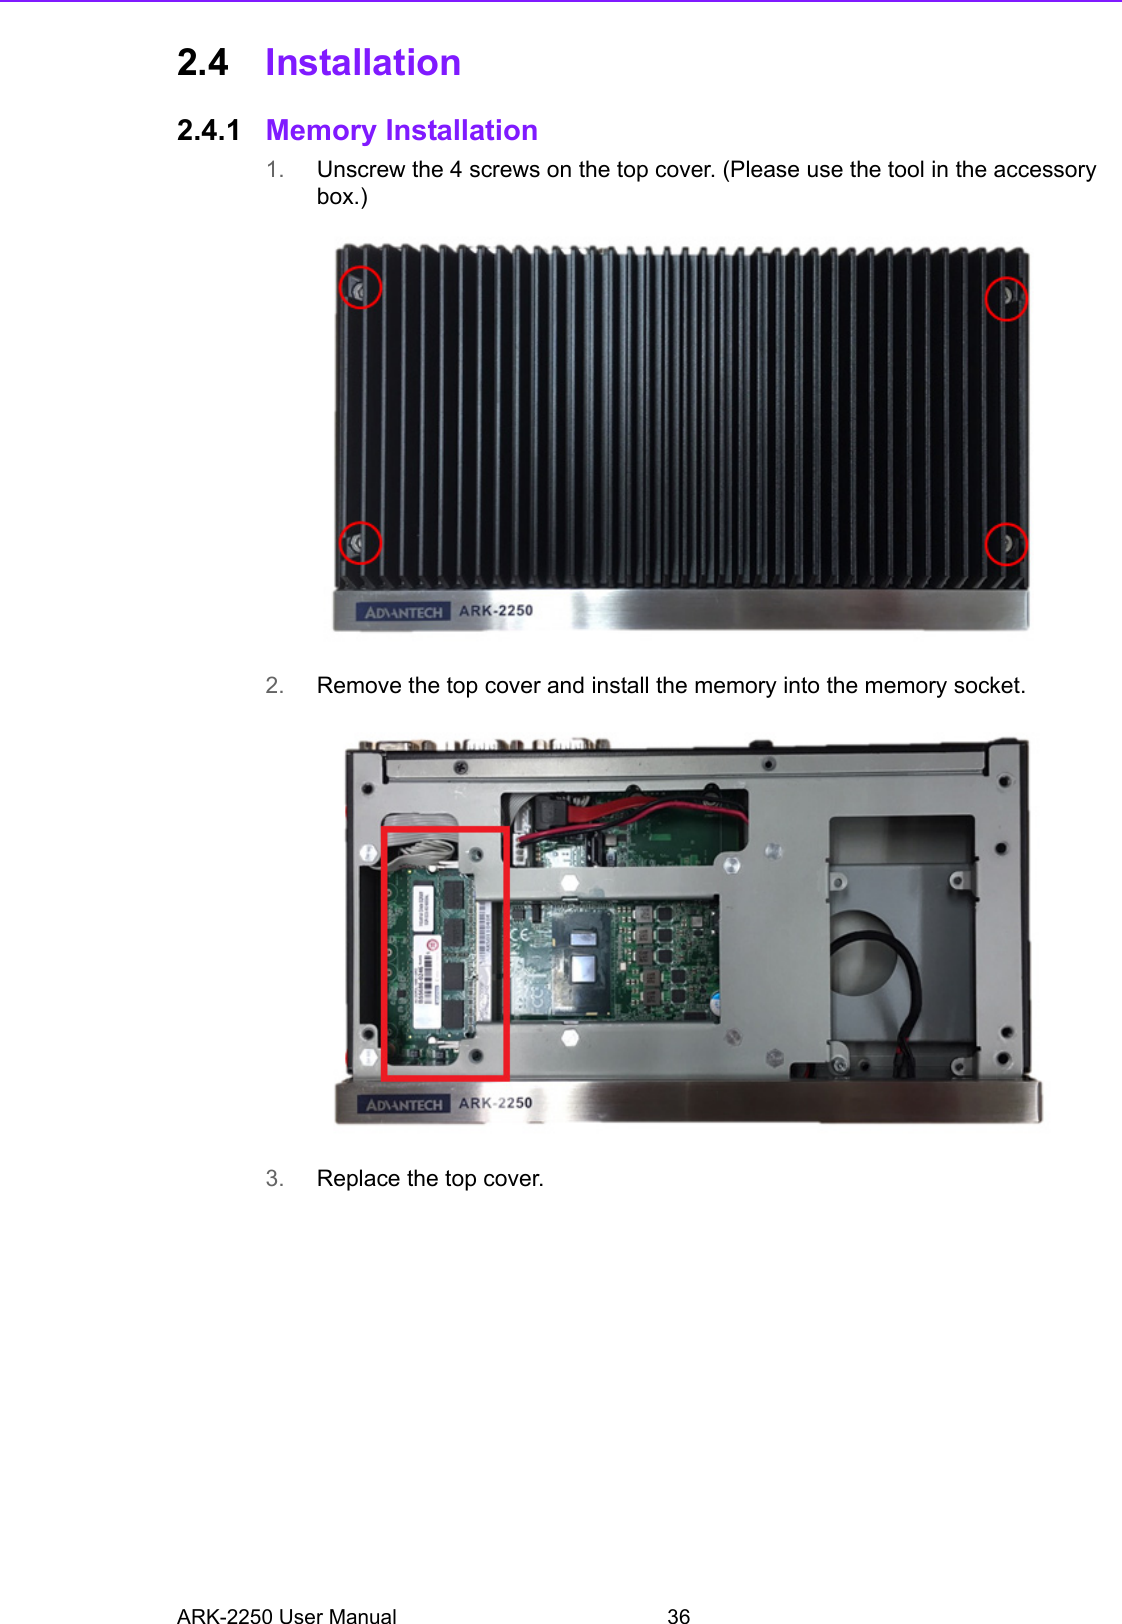 ARK-2250 User Manual 362.4 Installation2.4.1 Memory Installation1. Unscrew the 4 screws on the top cover. (Please use the tool in the accessory box.)2. Remove the top cover and install the memory into the memory socket.3. Replace the top cover.